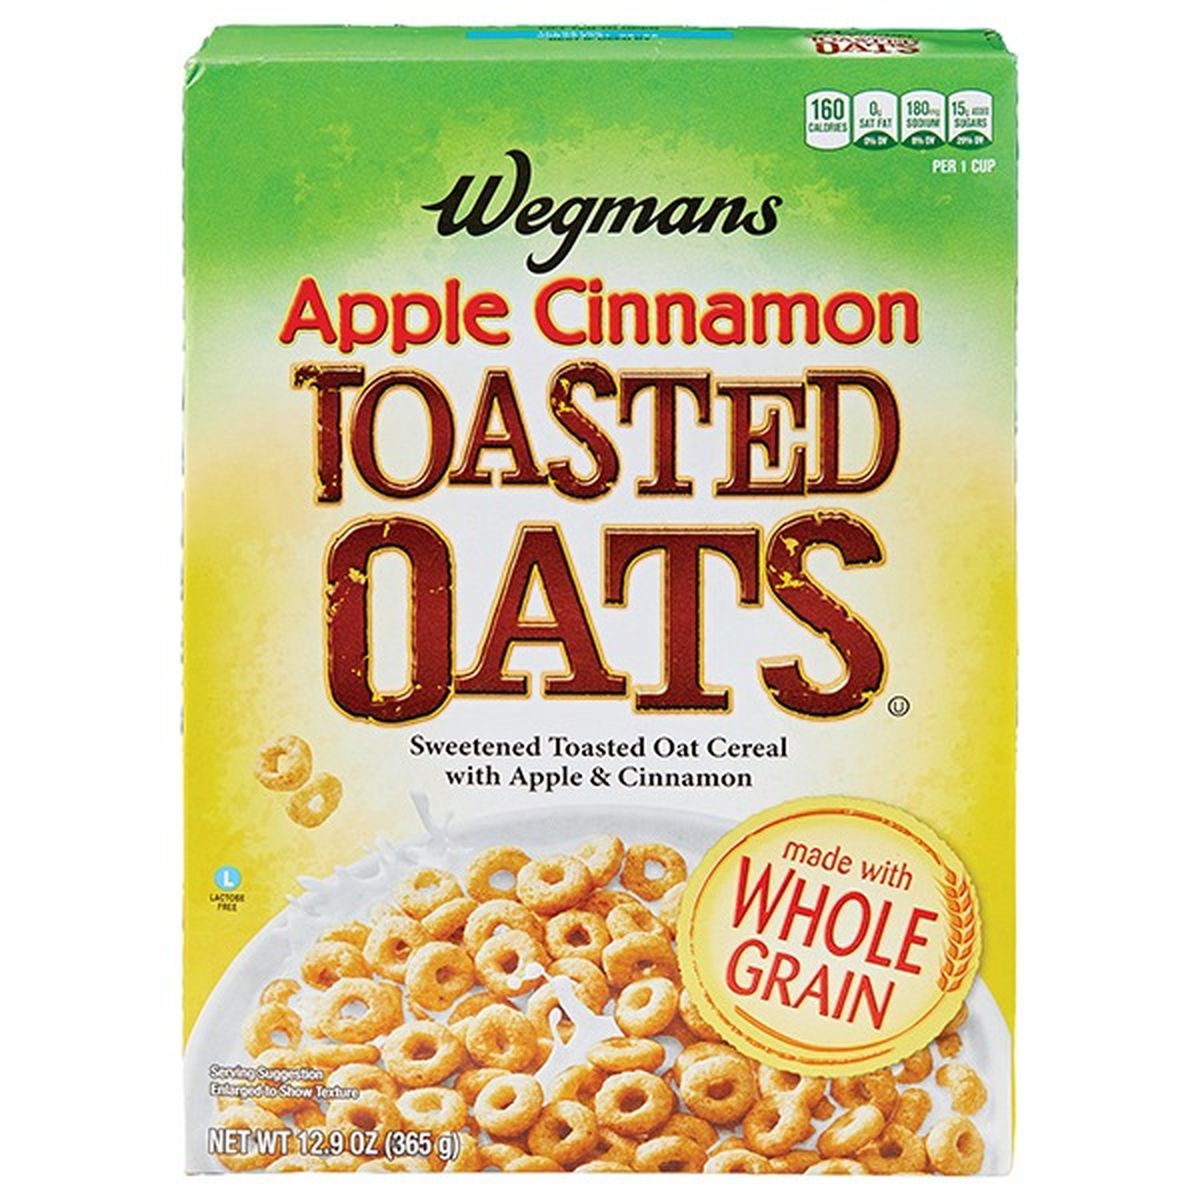 Calories in Wegmans Apple Cinnamon Toasted Oats Cereal